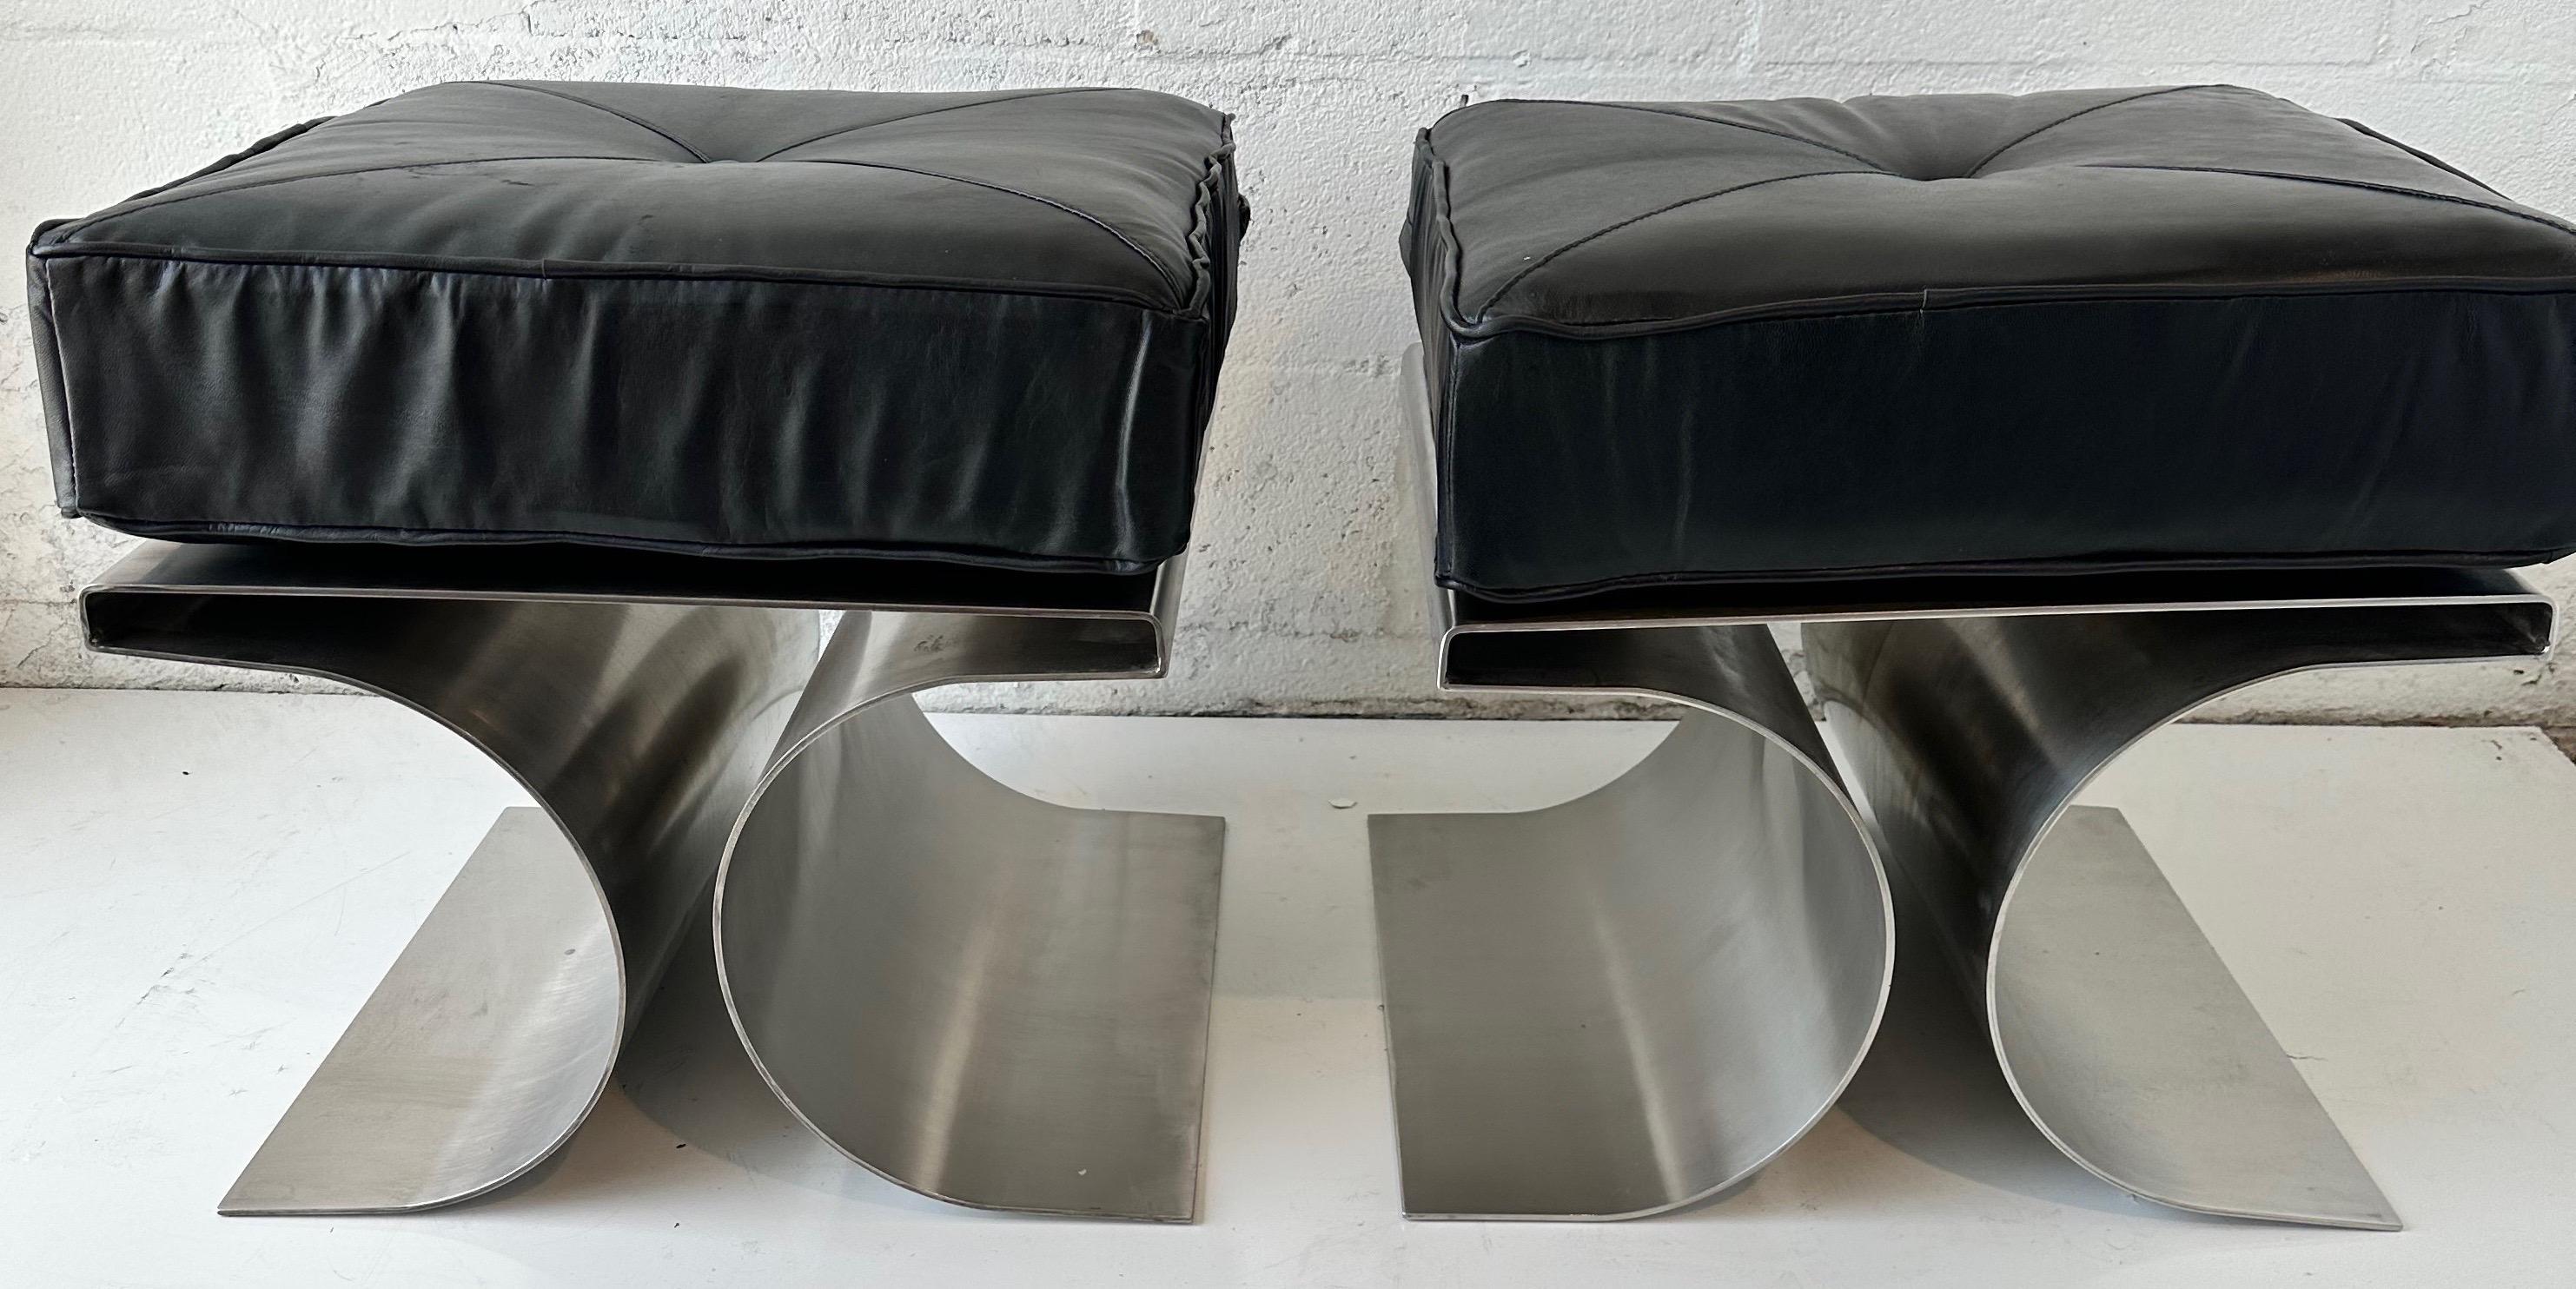 Pair of Michel Boyer style Stainless Steel and Black leather cushions with central button
X form, can be use as stool or side sofa without the cushions.